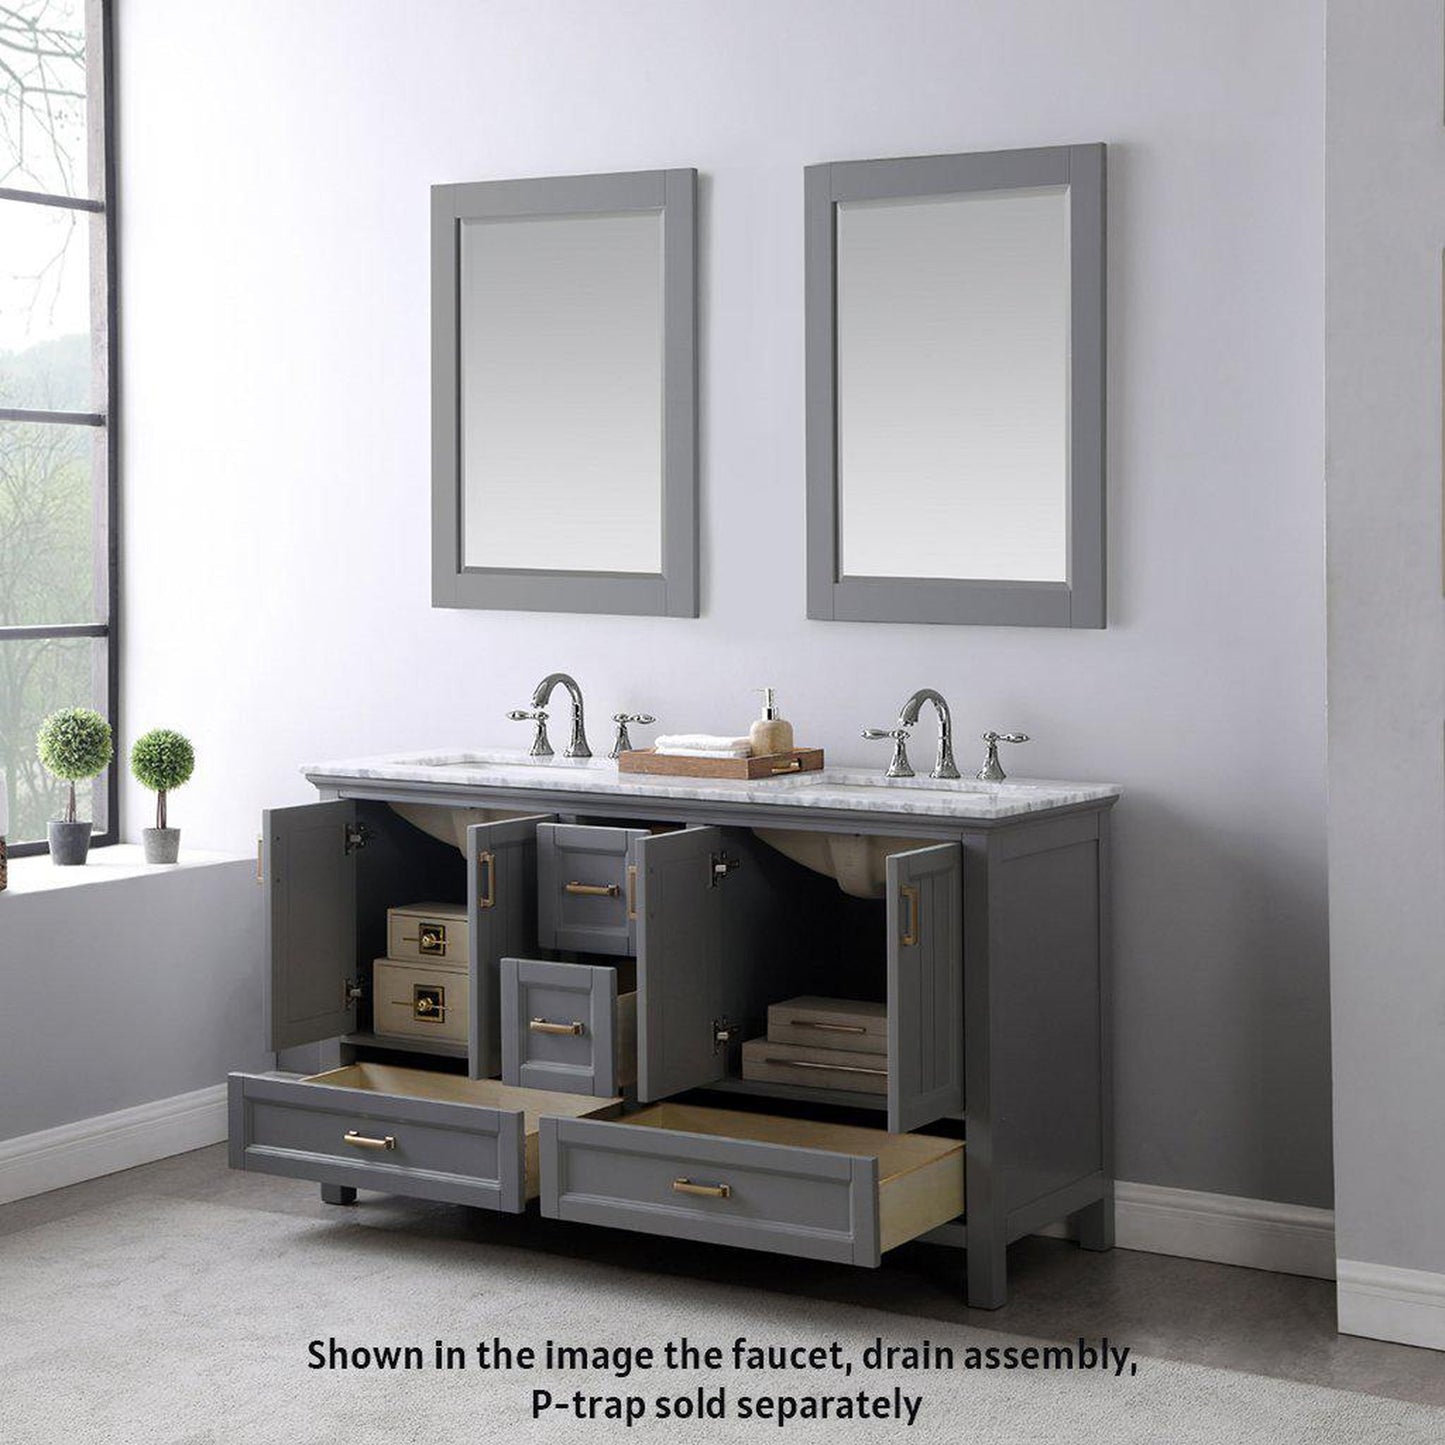 Altair Isla 60" Double Gray Freestanding Bathroom Vanity Set With Mirror, Natural Carrara White Marble Top, Two Rectangular Undermount Ceramic Sinks, and Overflow